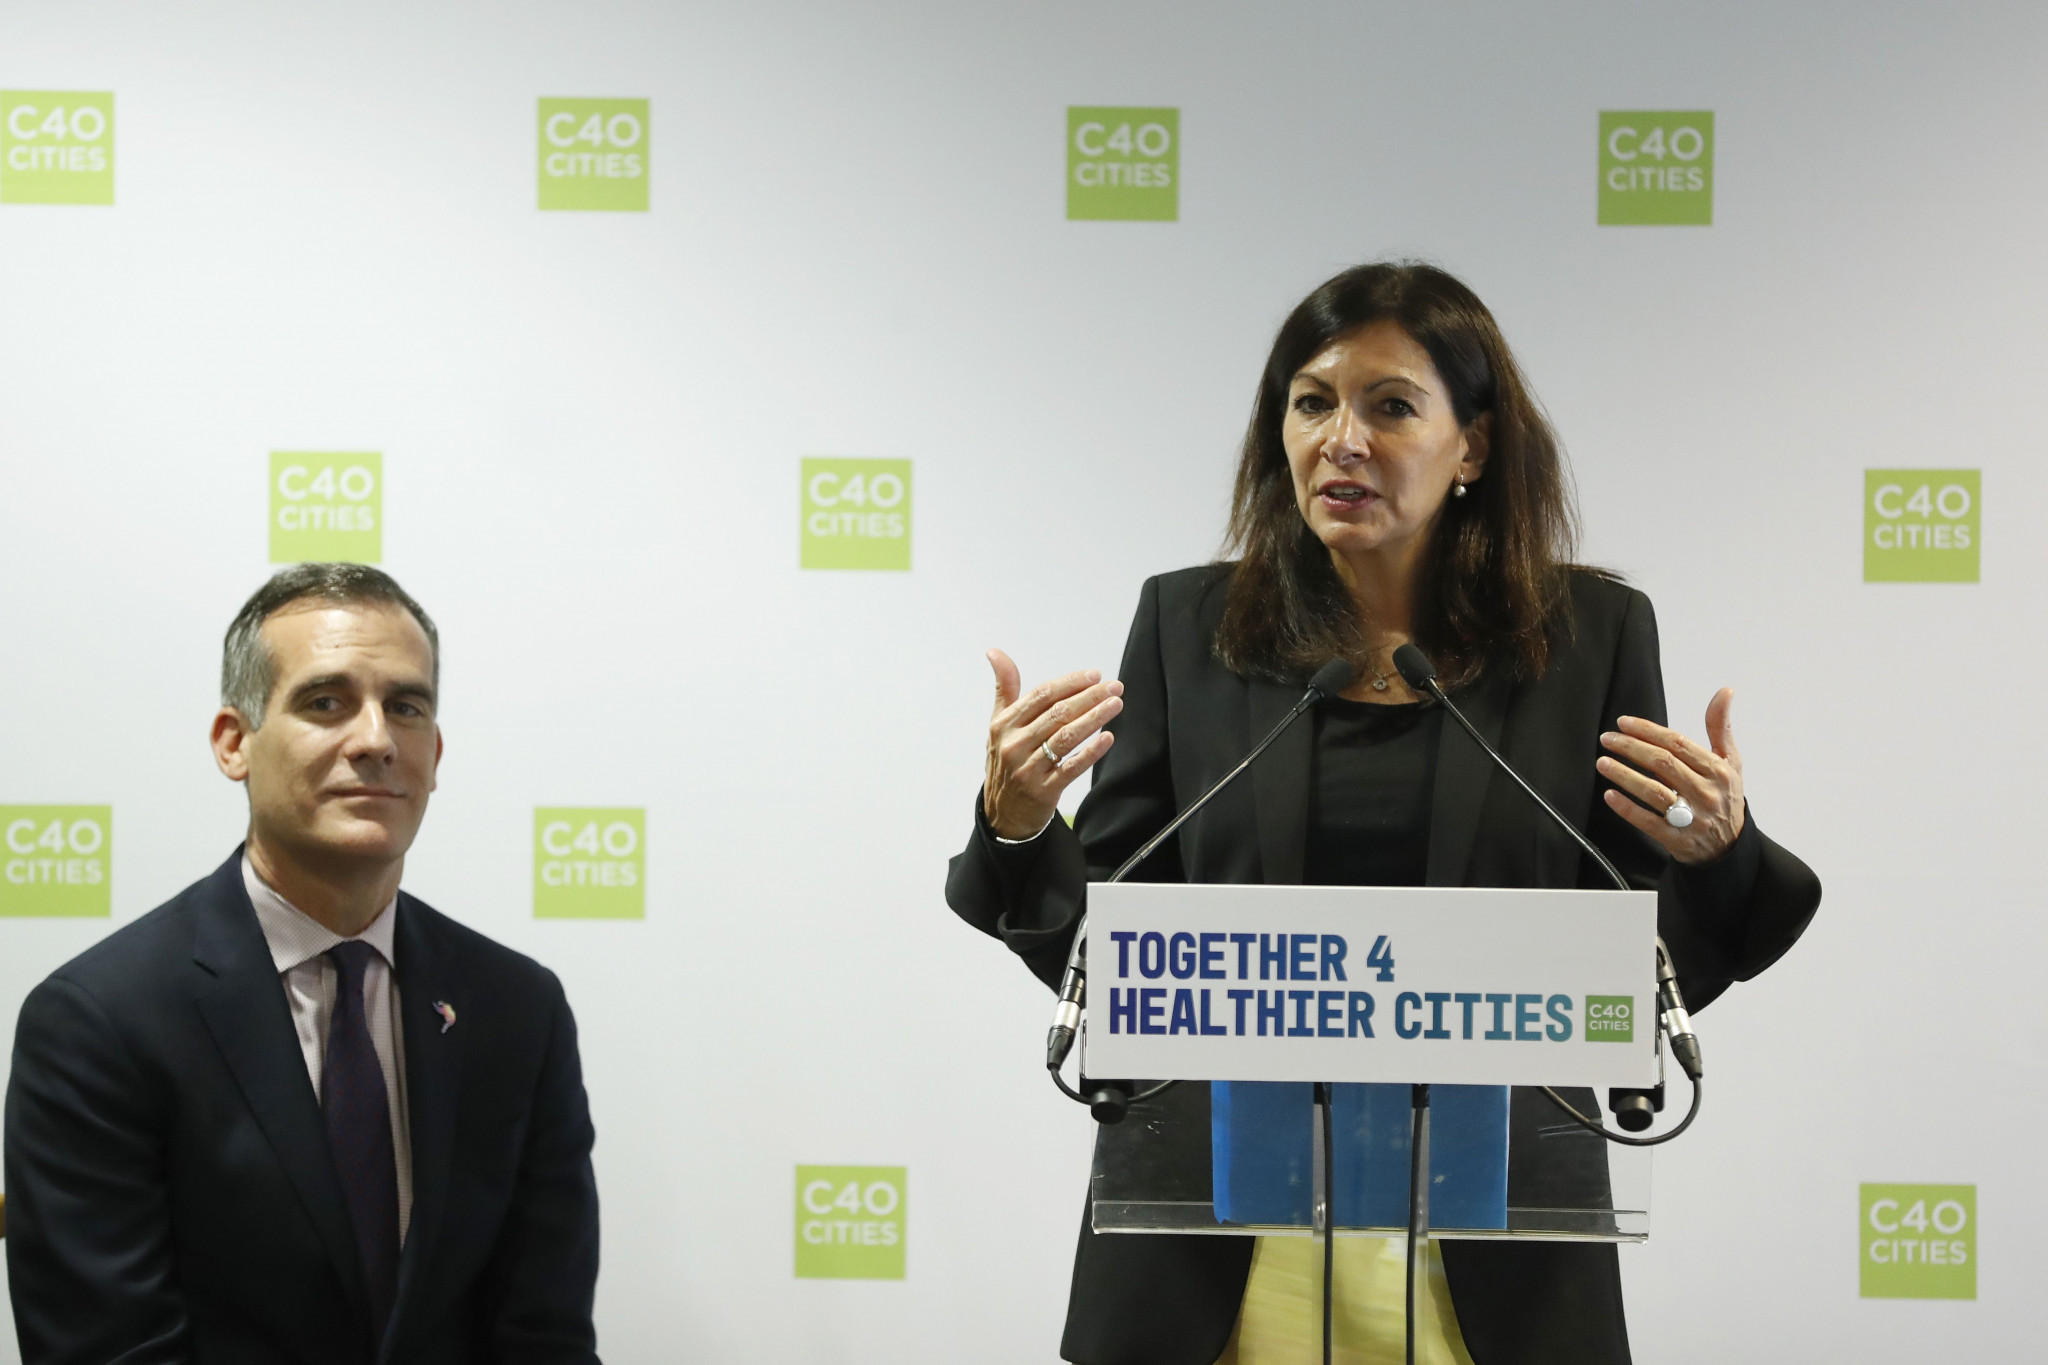 Eric Garcetti and Anne Hidalgo have talked about increasing the sustainability of their Games ©Getty Images